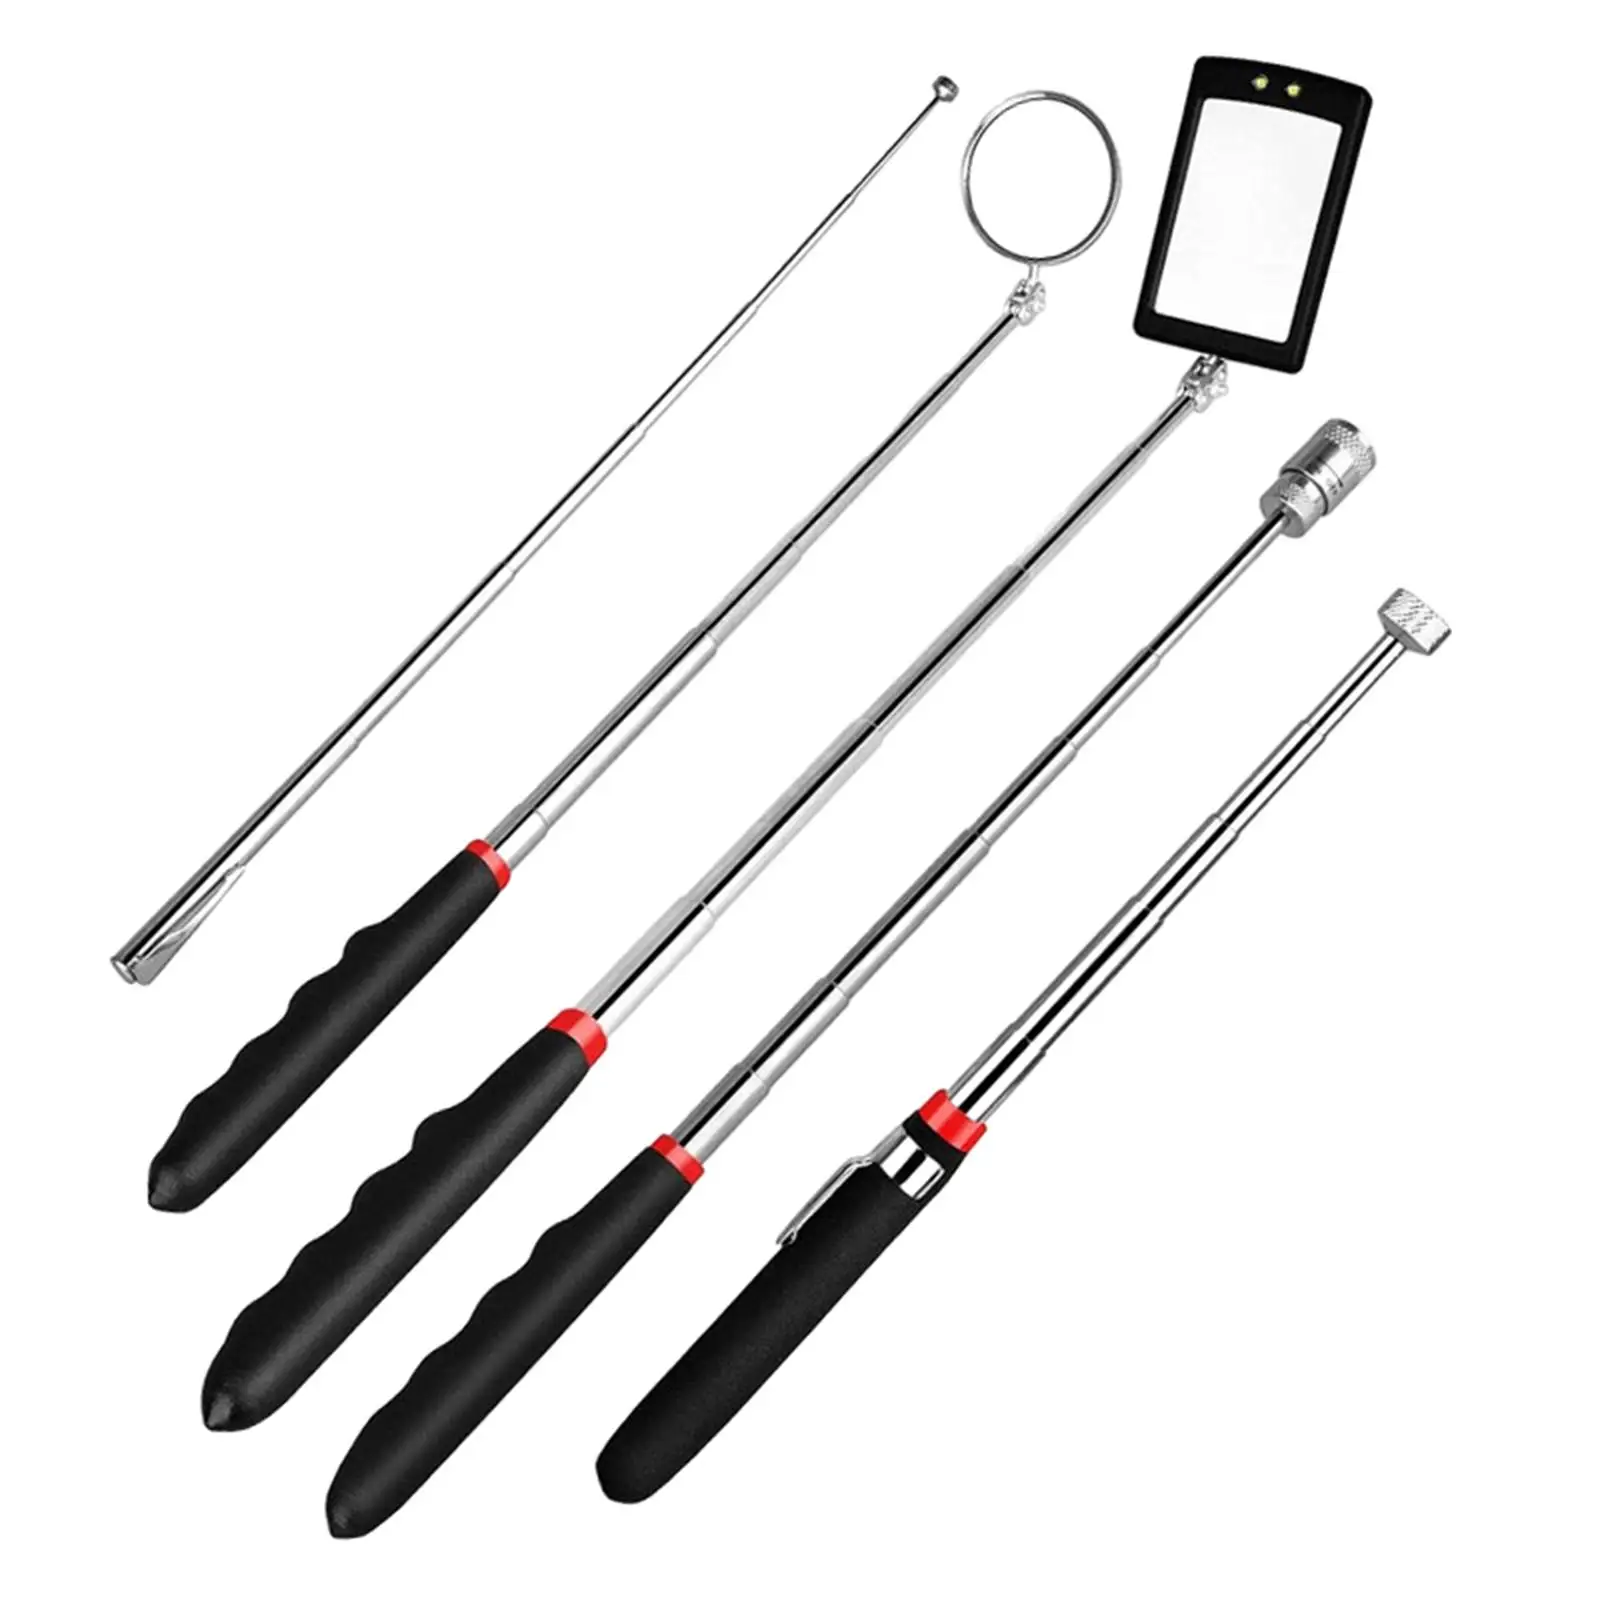 5Pcs Magnetic Telescoping Pick up Tool Kit Lightweight Multifunctional Sturdy Adjustable Inspection Mirror for Automobile Parts